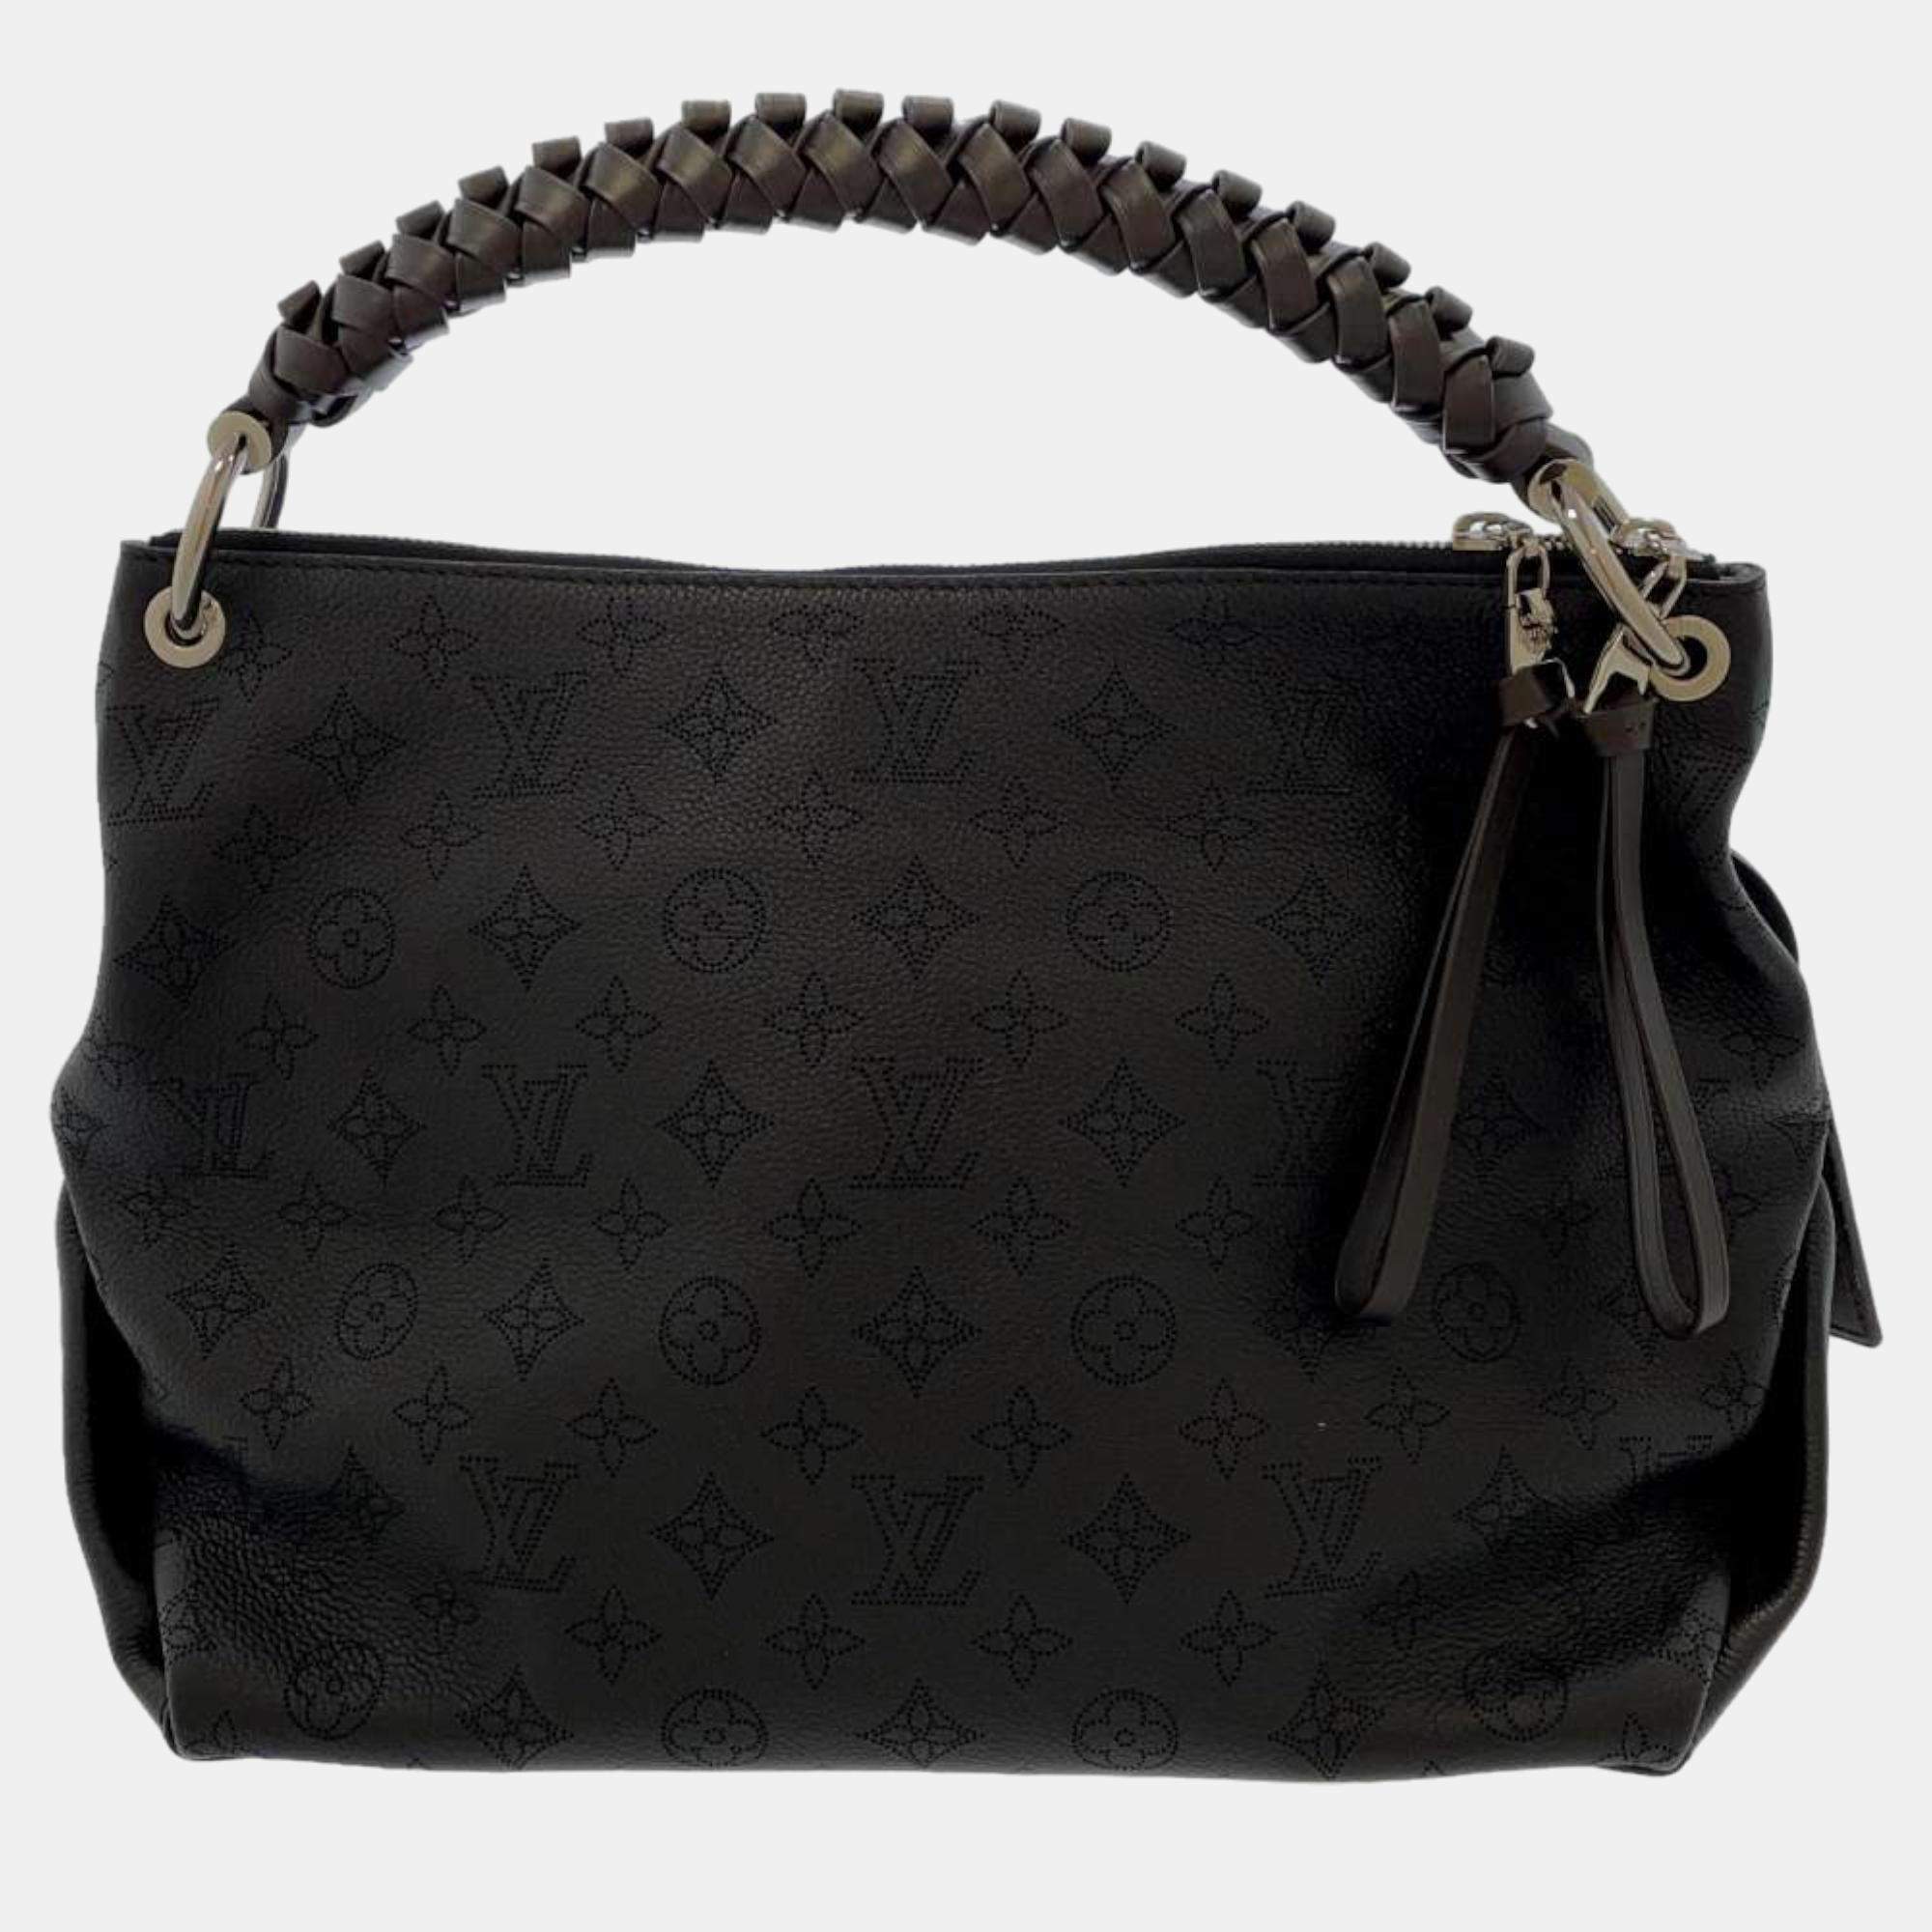 Wear It's At - Louis Vuitton Babylone Chain BB bag in the